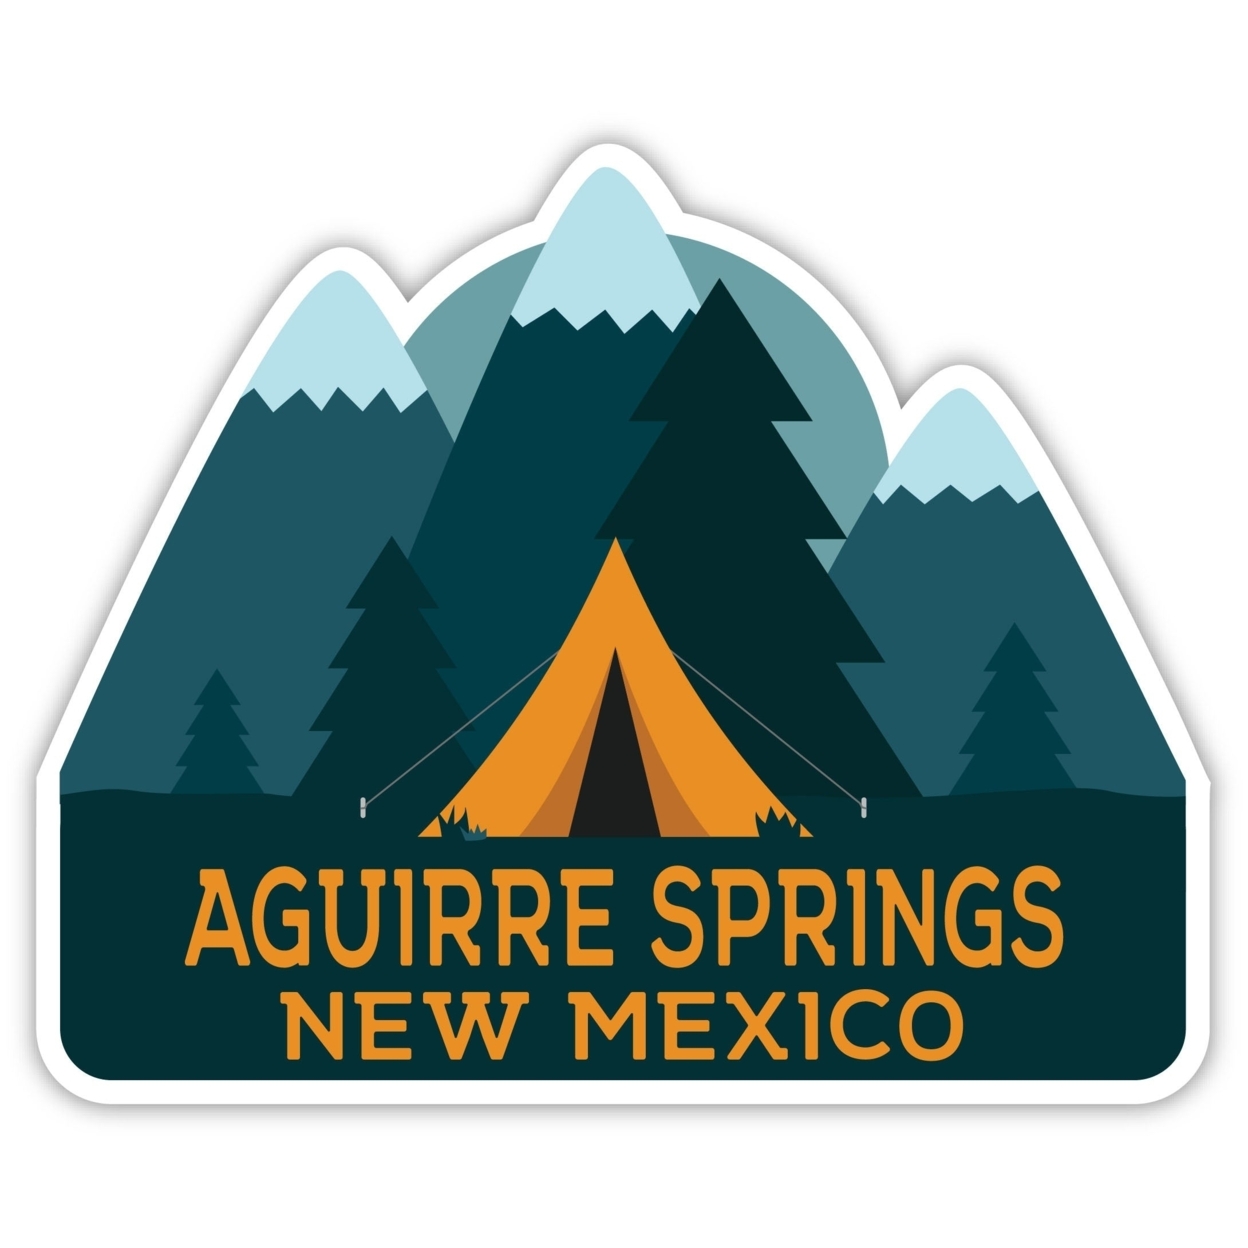 Aguirre Springs New Mexico Souvenir Decorative Stickers (Choose Theme And Size) - 4-Pack, 4-Inch, Tent